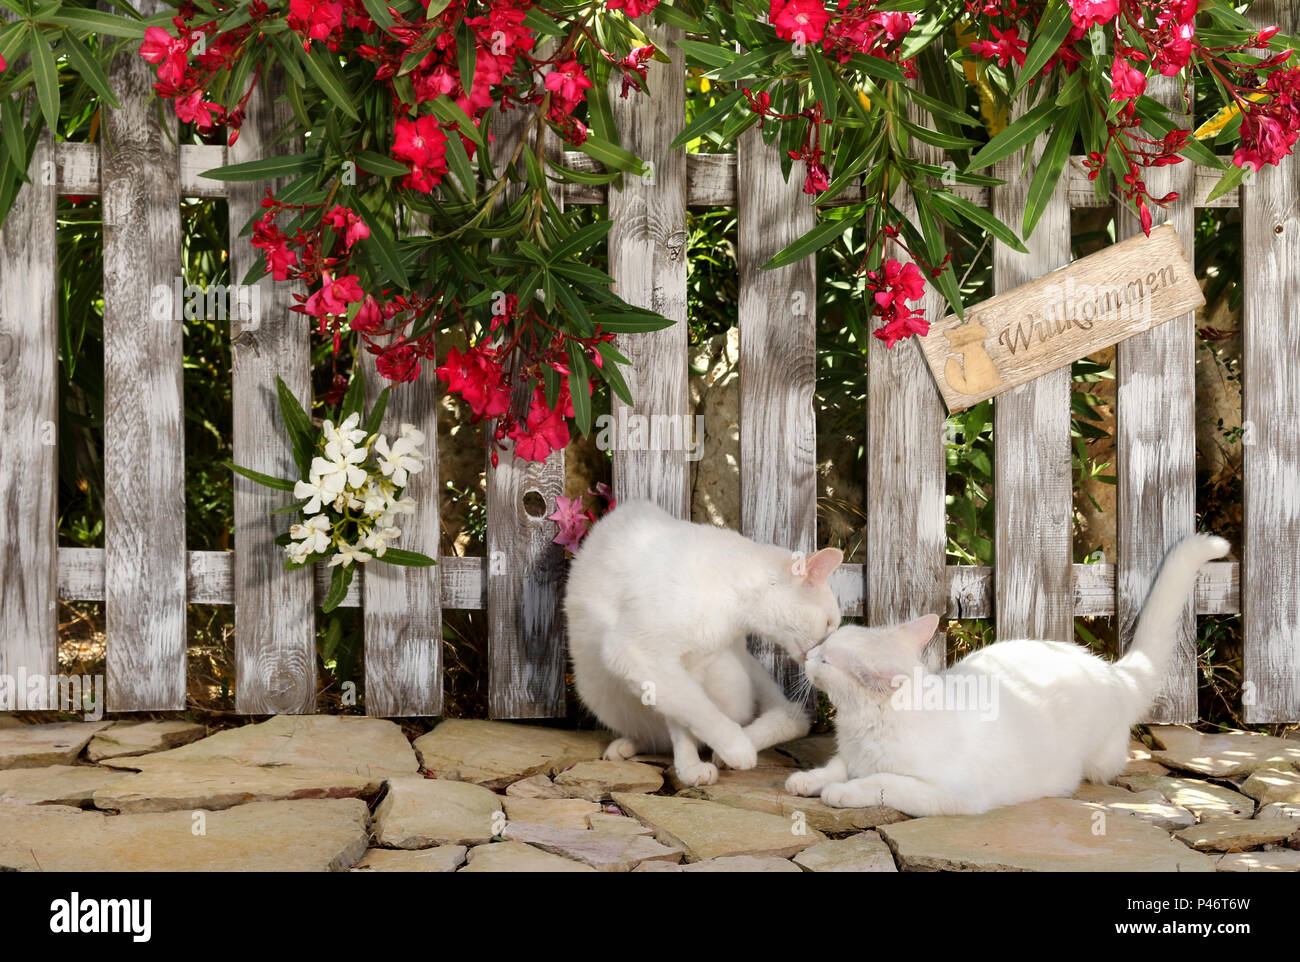 two white cats cuddling at a fence with an oleander shrub Stock Photo